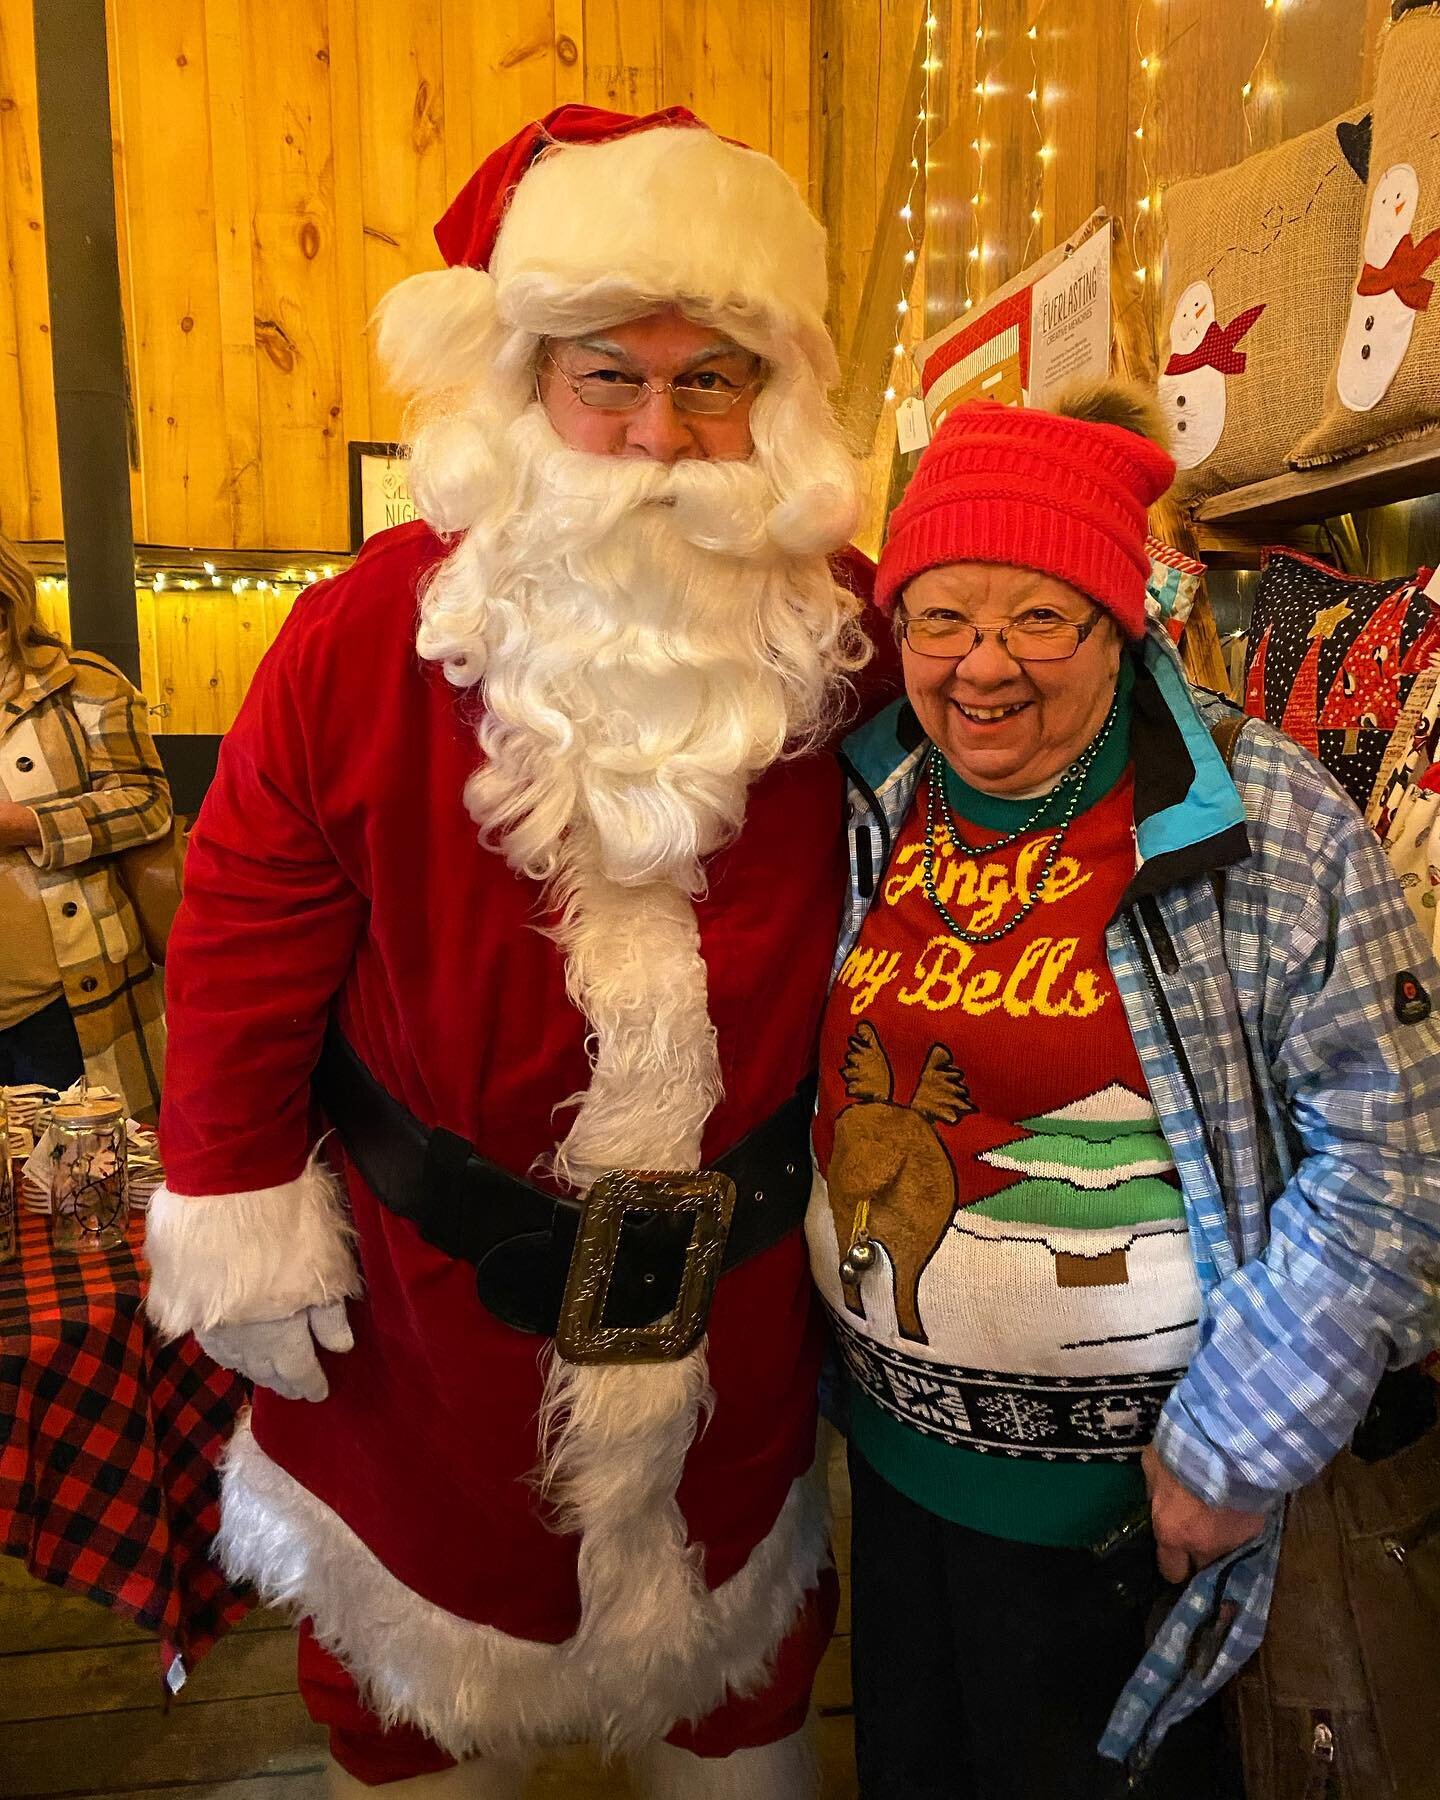 Look who stopped by! No, not Santa. He&rsquo;s always at the farm for the Holiday season. 
It&rsquo;s Nana Hope! Jingling her bells all the way. #familyfirst #santa #christmastreefarm #makingmemories #christmasspirit #morethanjustatreefarm